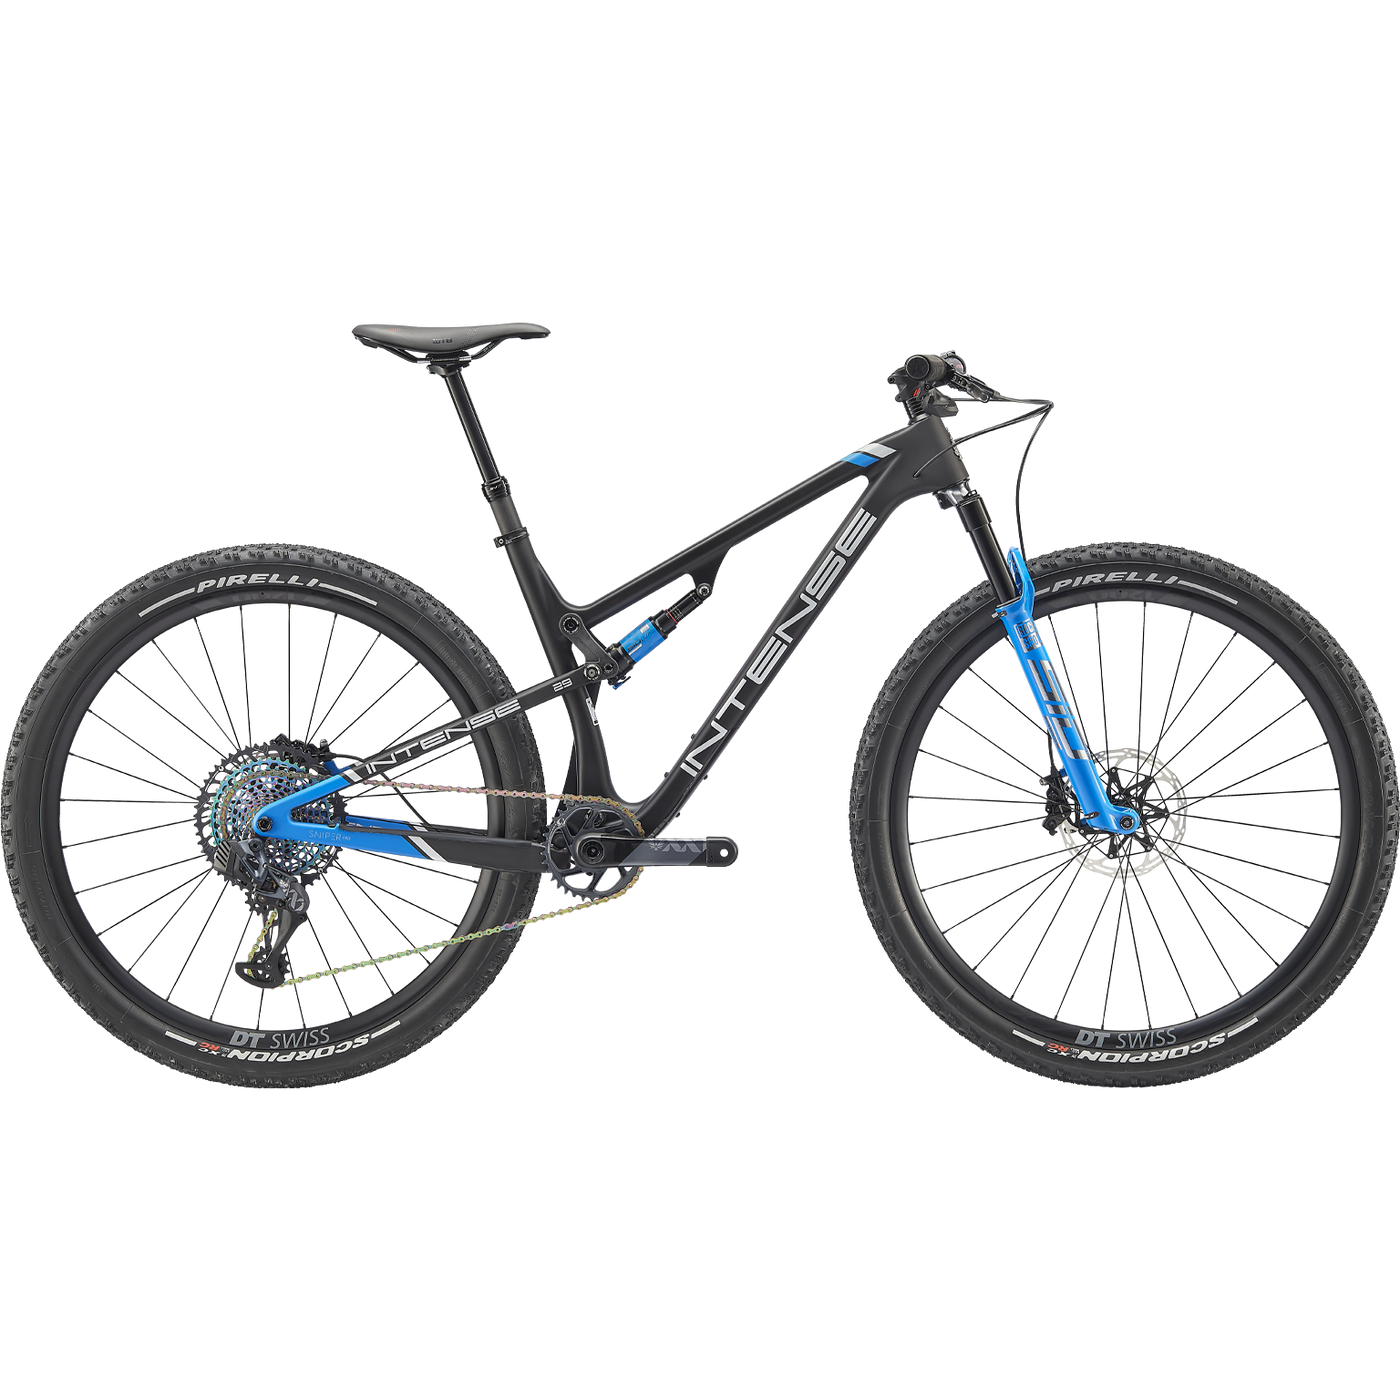 Shop Sniper XC FRO Carbon Cross Country Mountain Bike for sale online or at an authorized dealer